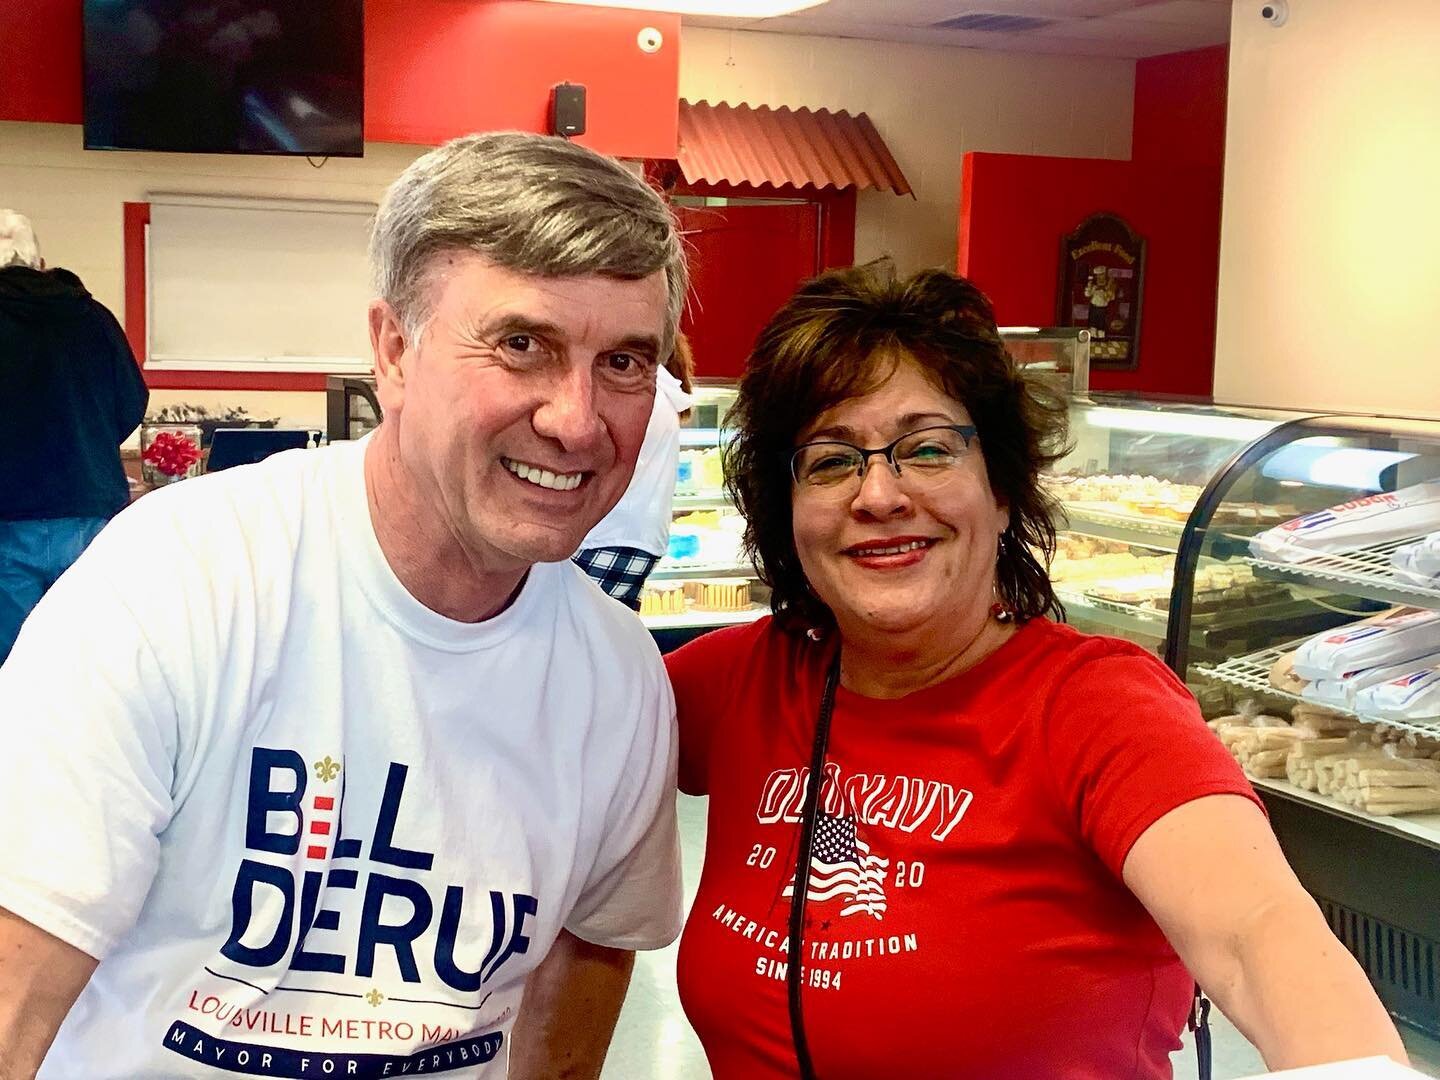 The Cuban community in Louisville is a very welcoming group &mdash; which I have gotten to experience on many occasions. 

My friend Berta Weyenberg was so kind to invite me to Sweet Havana on Fern Valley Road where she was helping her fellow Cuban i